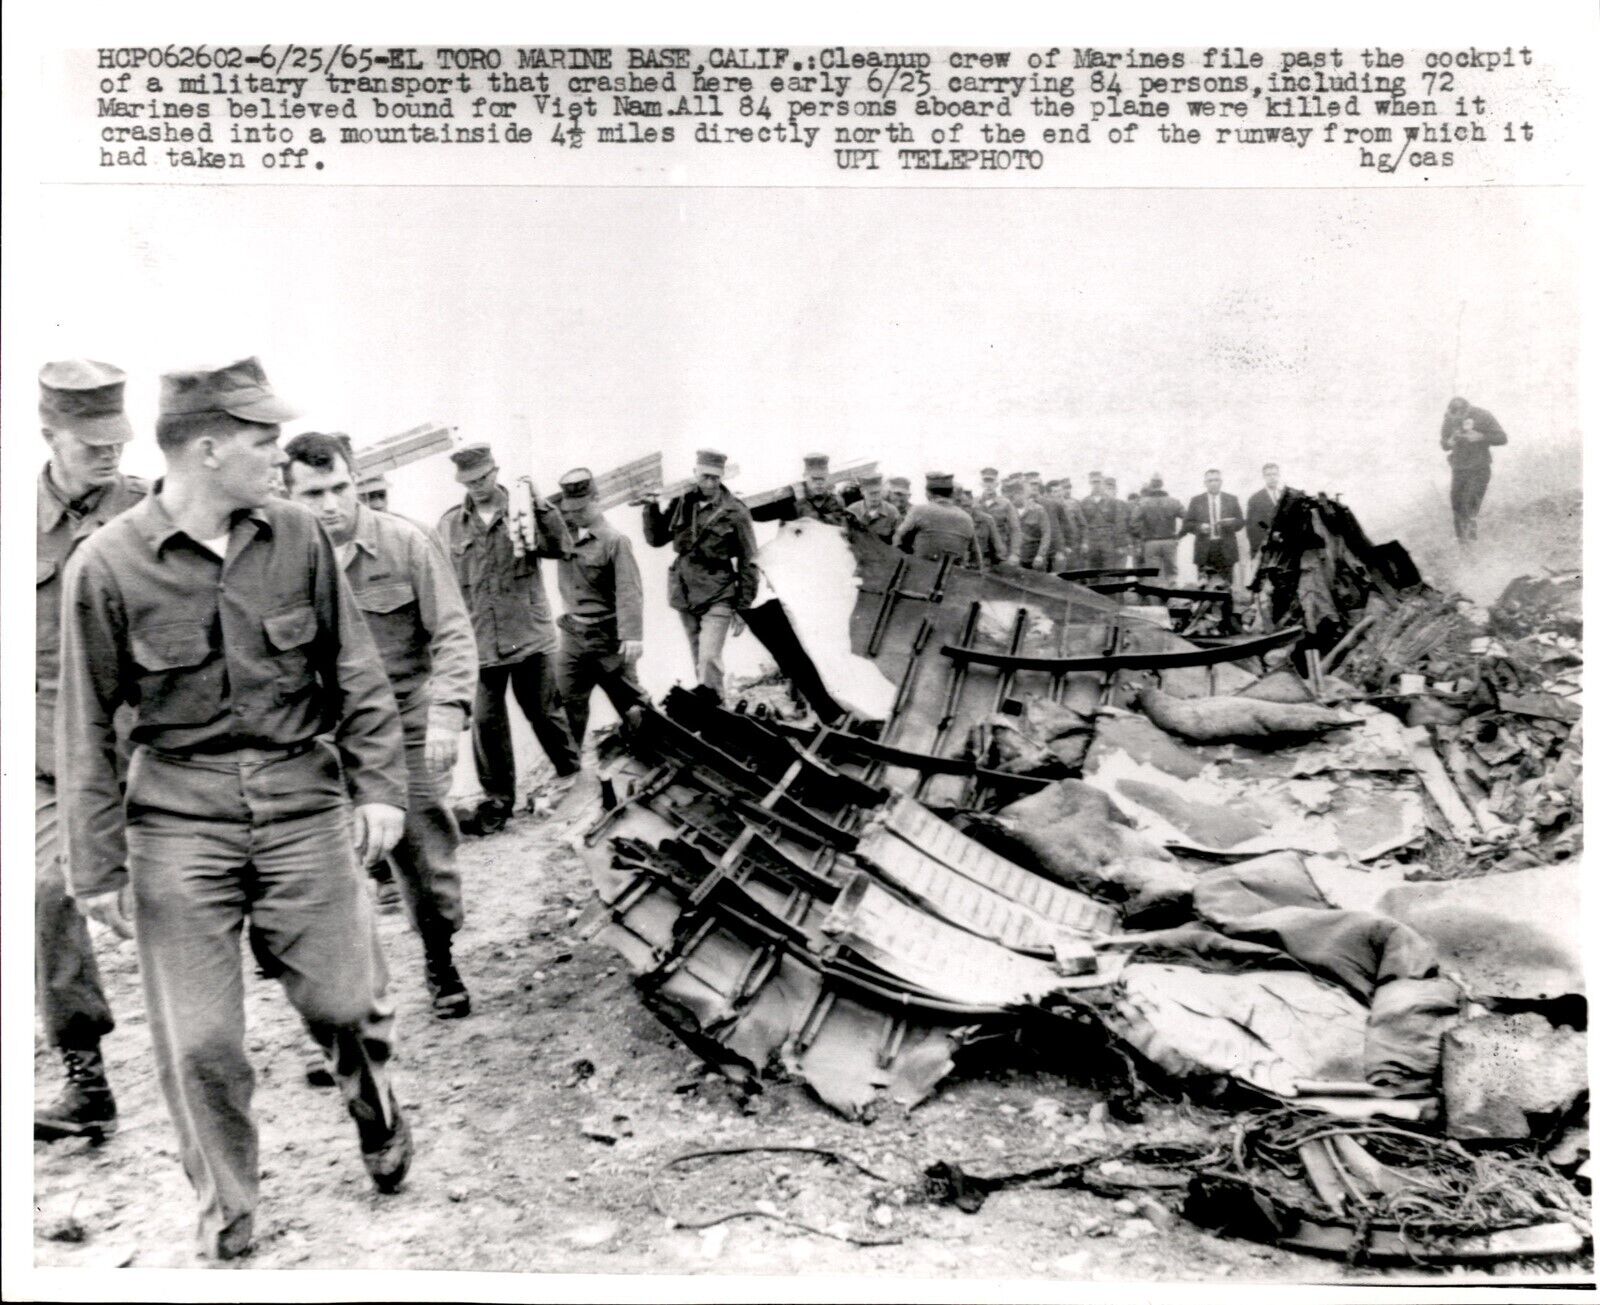 LD279 1965 Wire Photo US MARINE CLEAN-UP CREW CRASHED TRANSPORT PLANE WRECKAGE